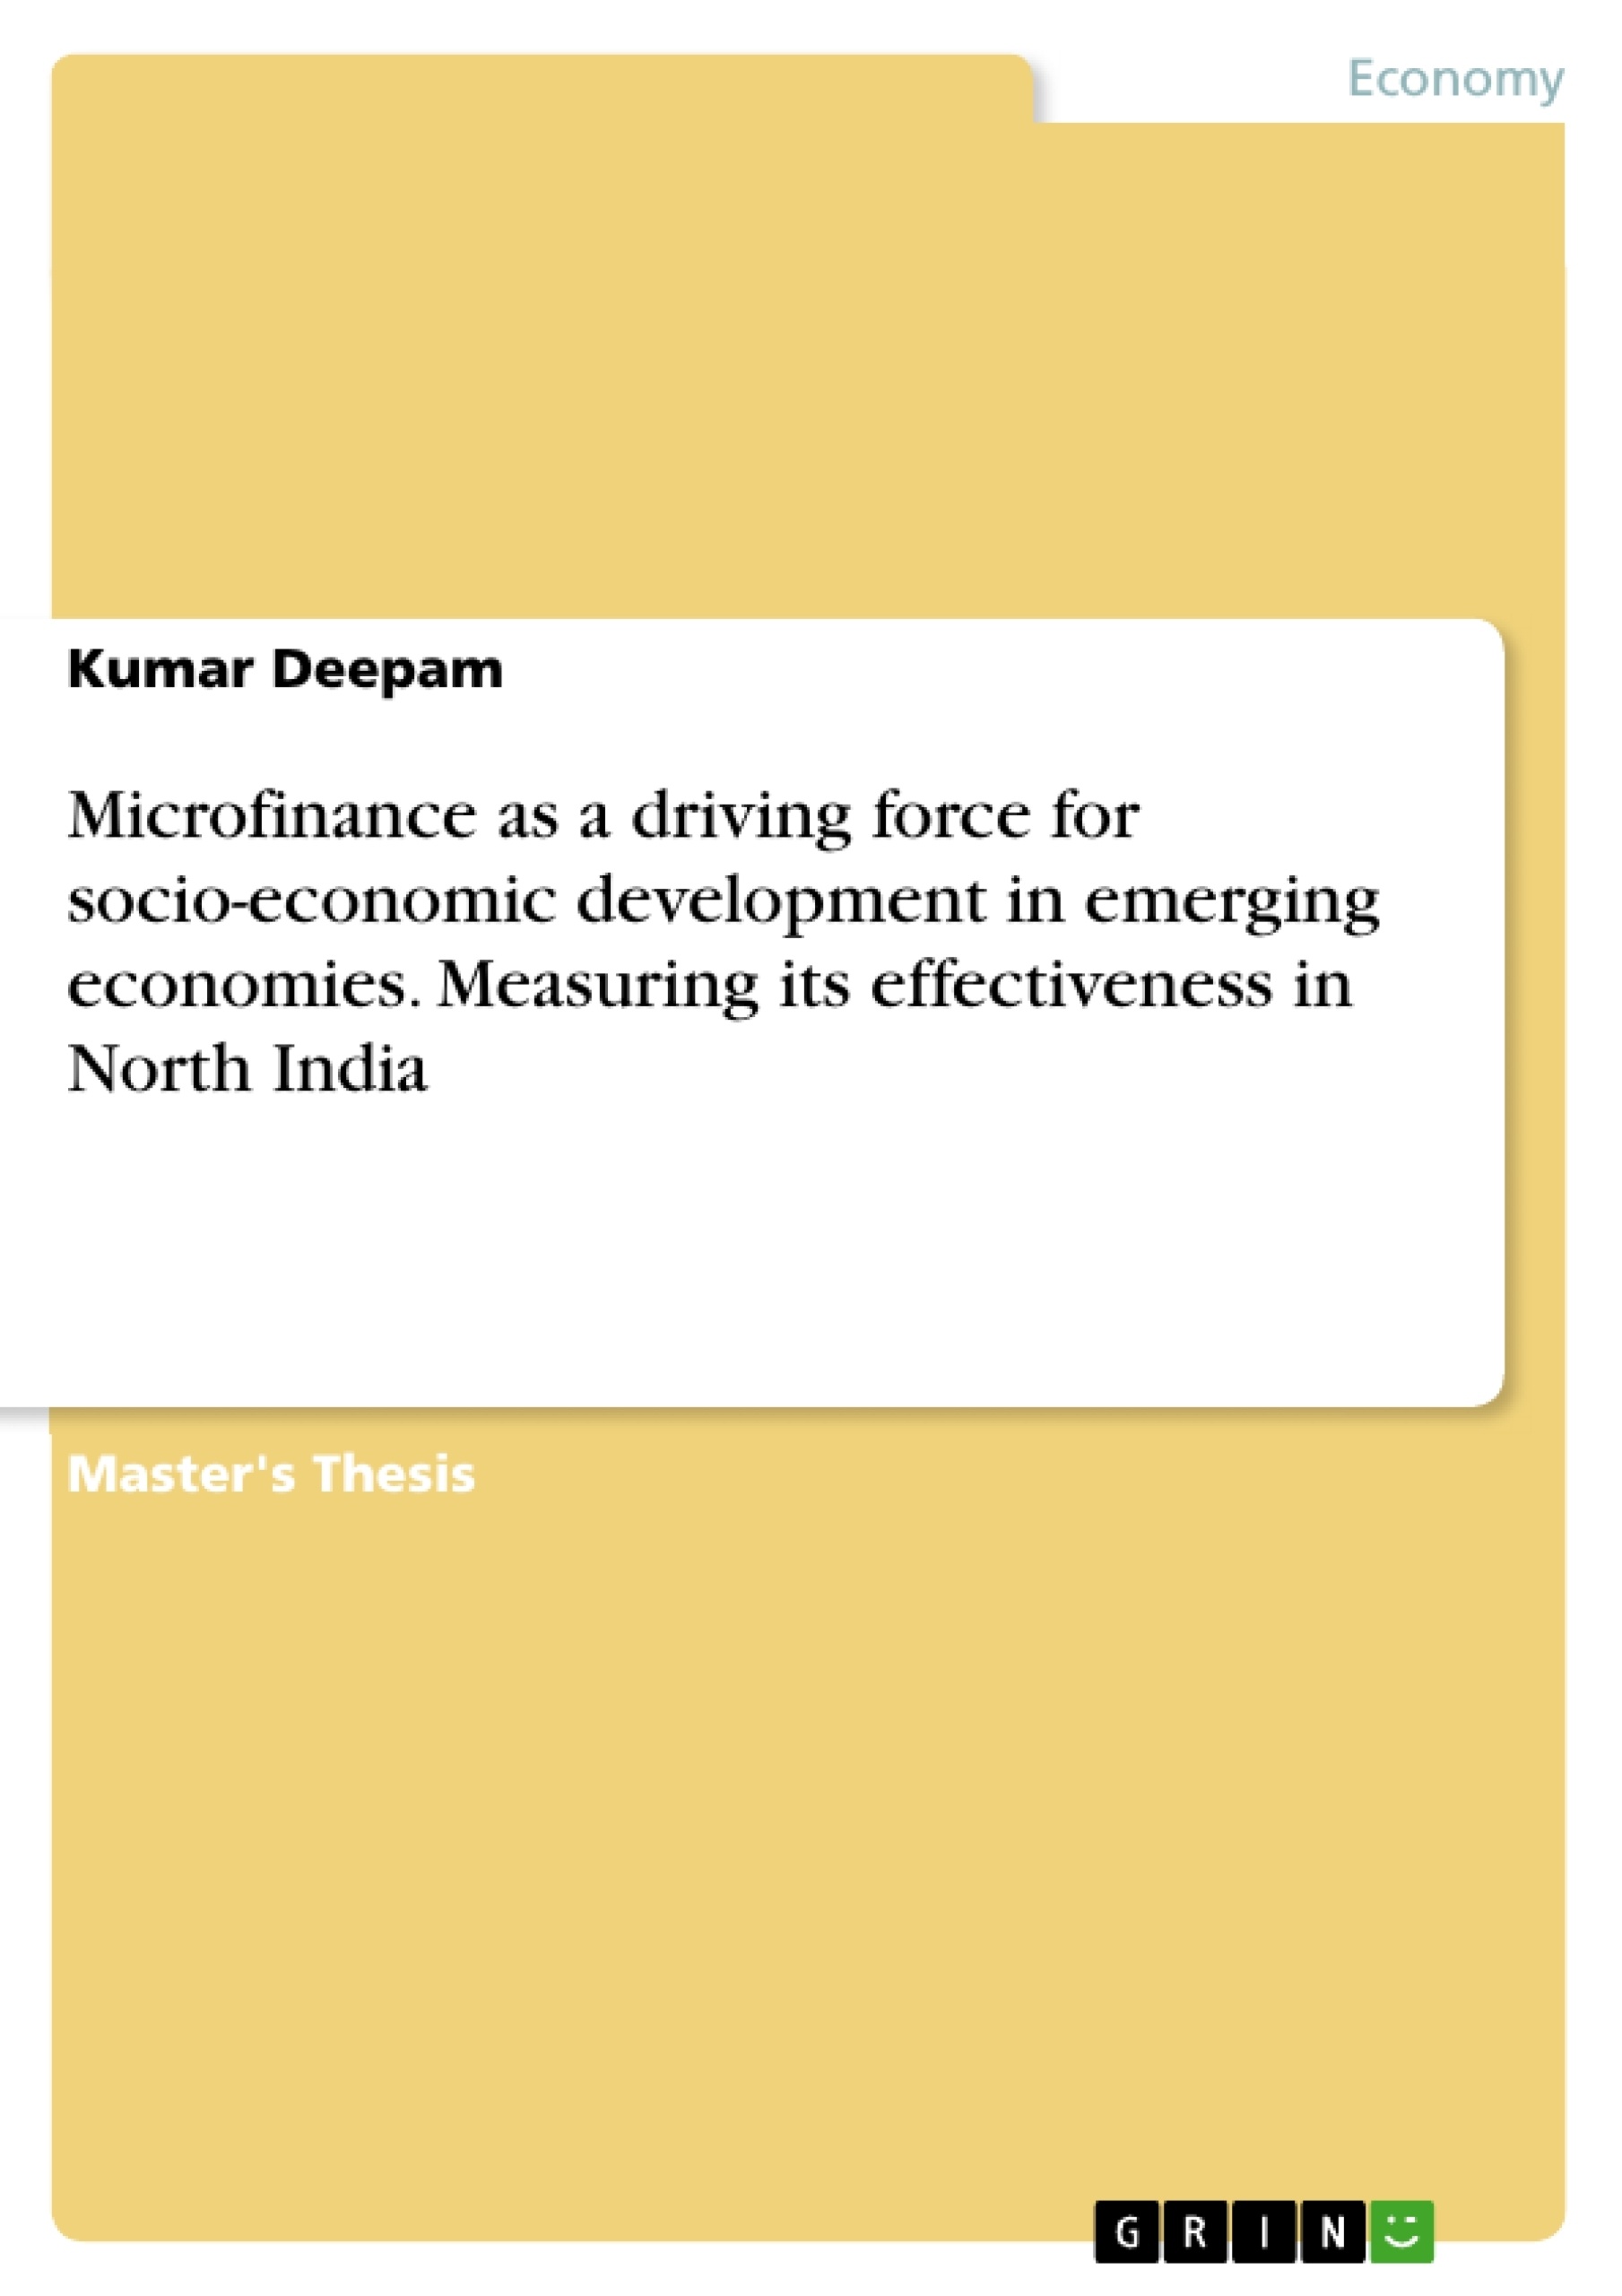 Titel: Microfinance as a driving force for socio-economic development in emerging economies. Measuring its effectiveness in North India